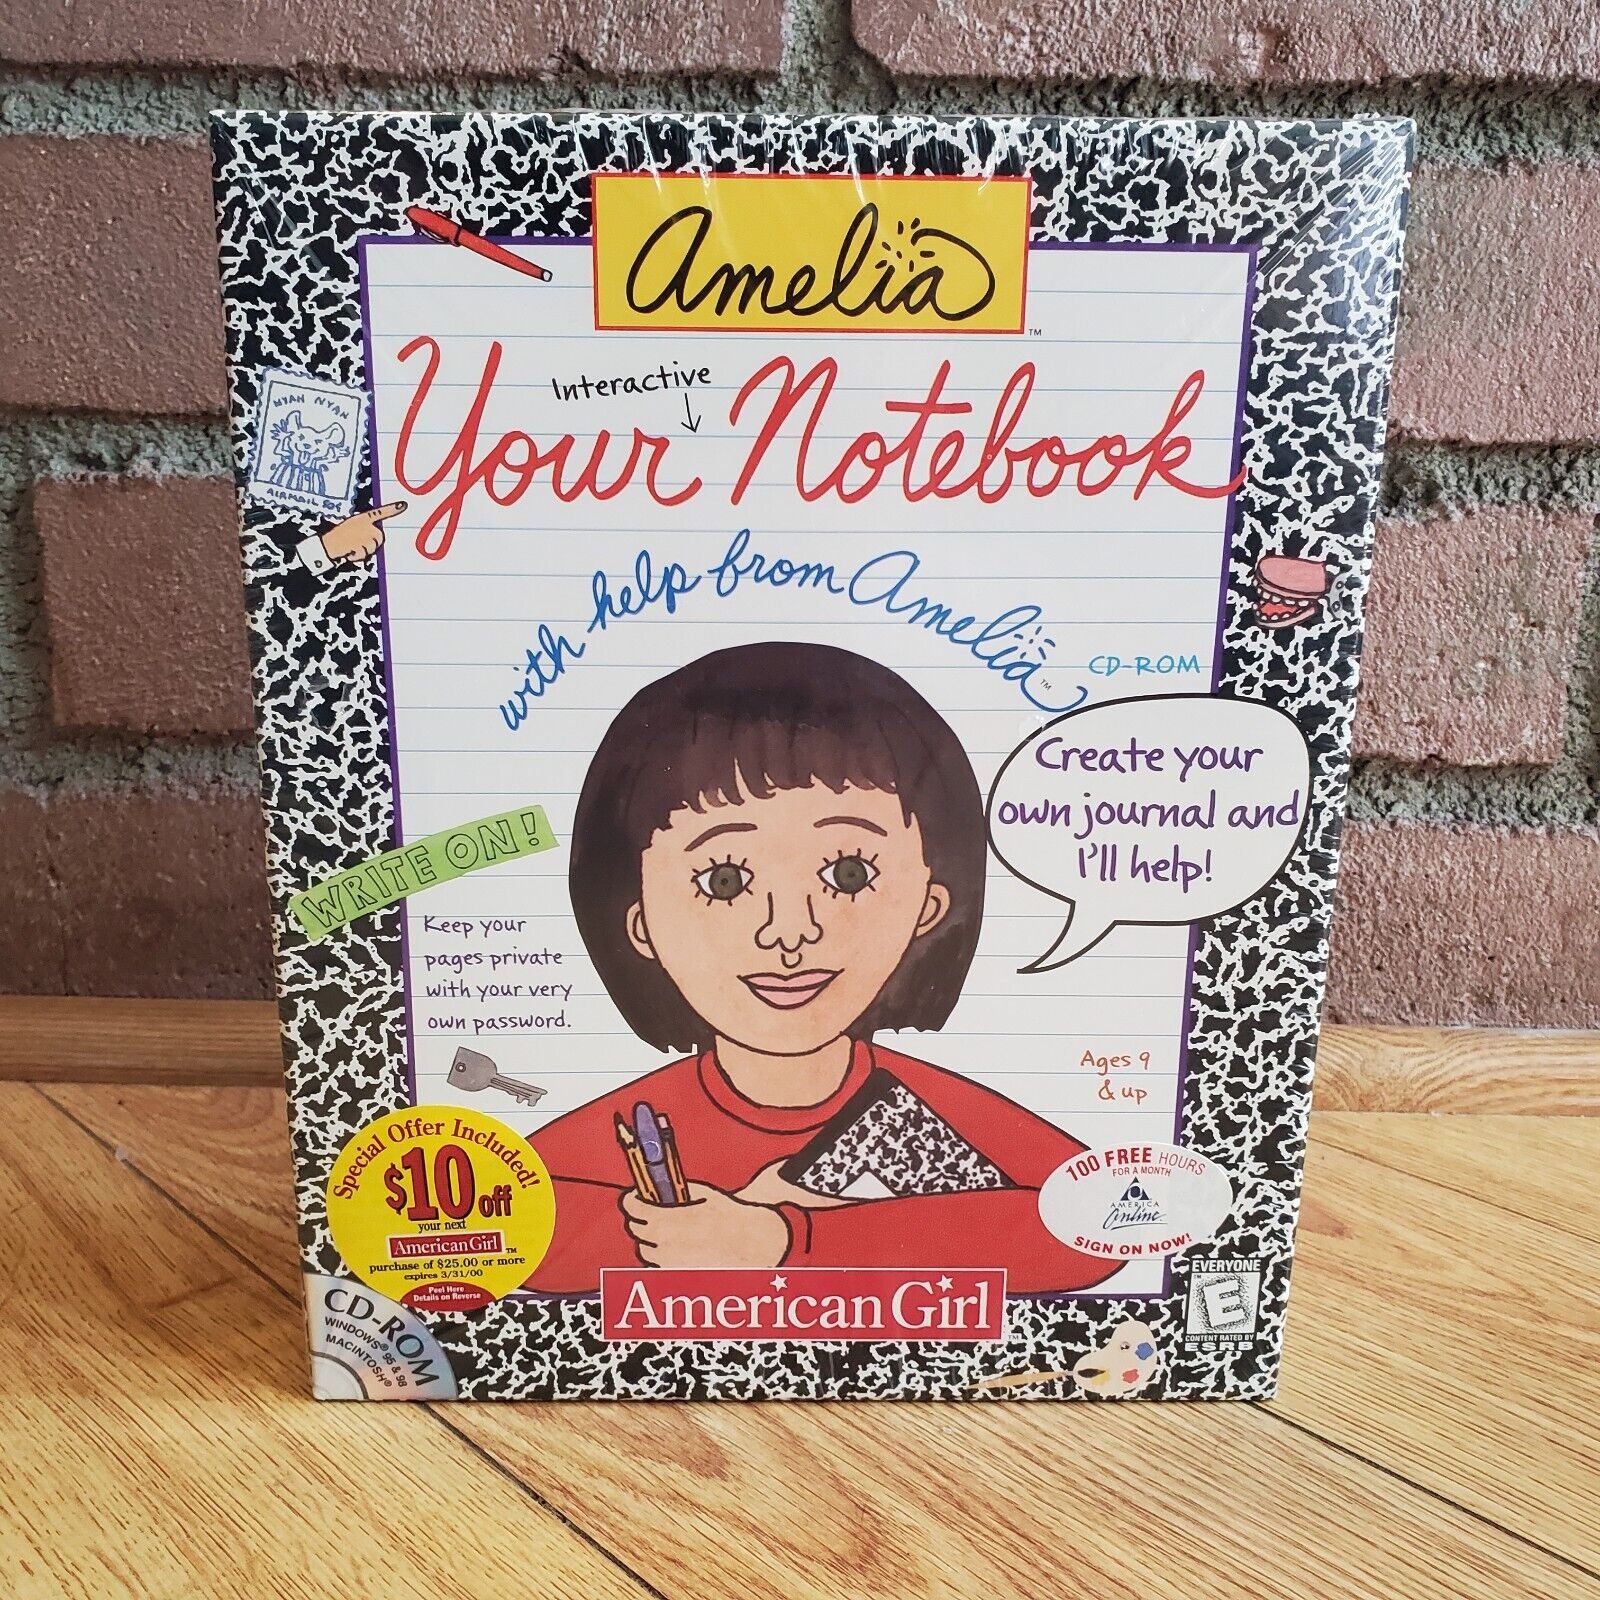 SEALED Vintage 1999 American Girl Amelia Your Notebook CD-ROM PC MAC Software